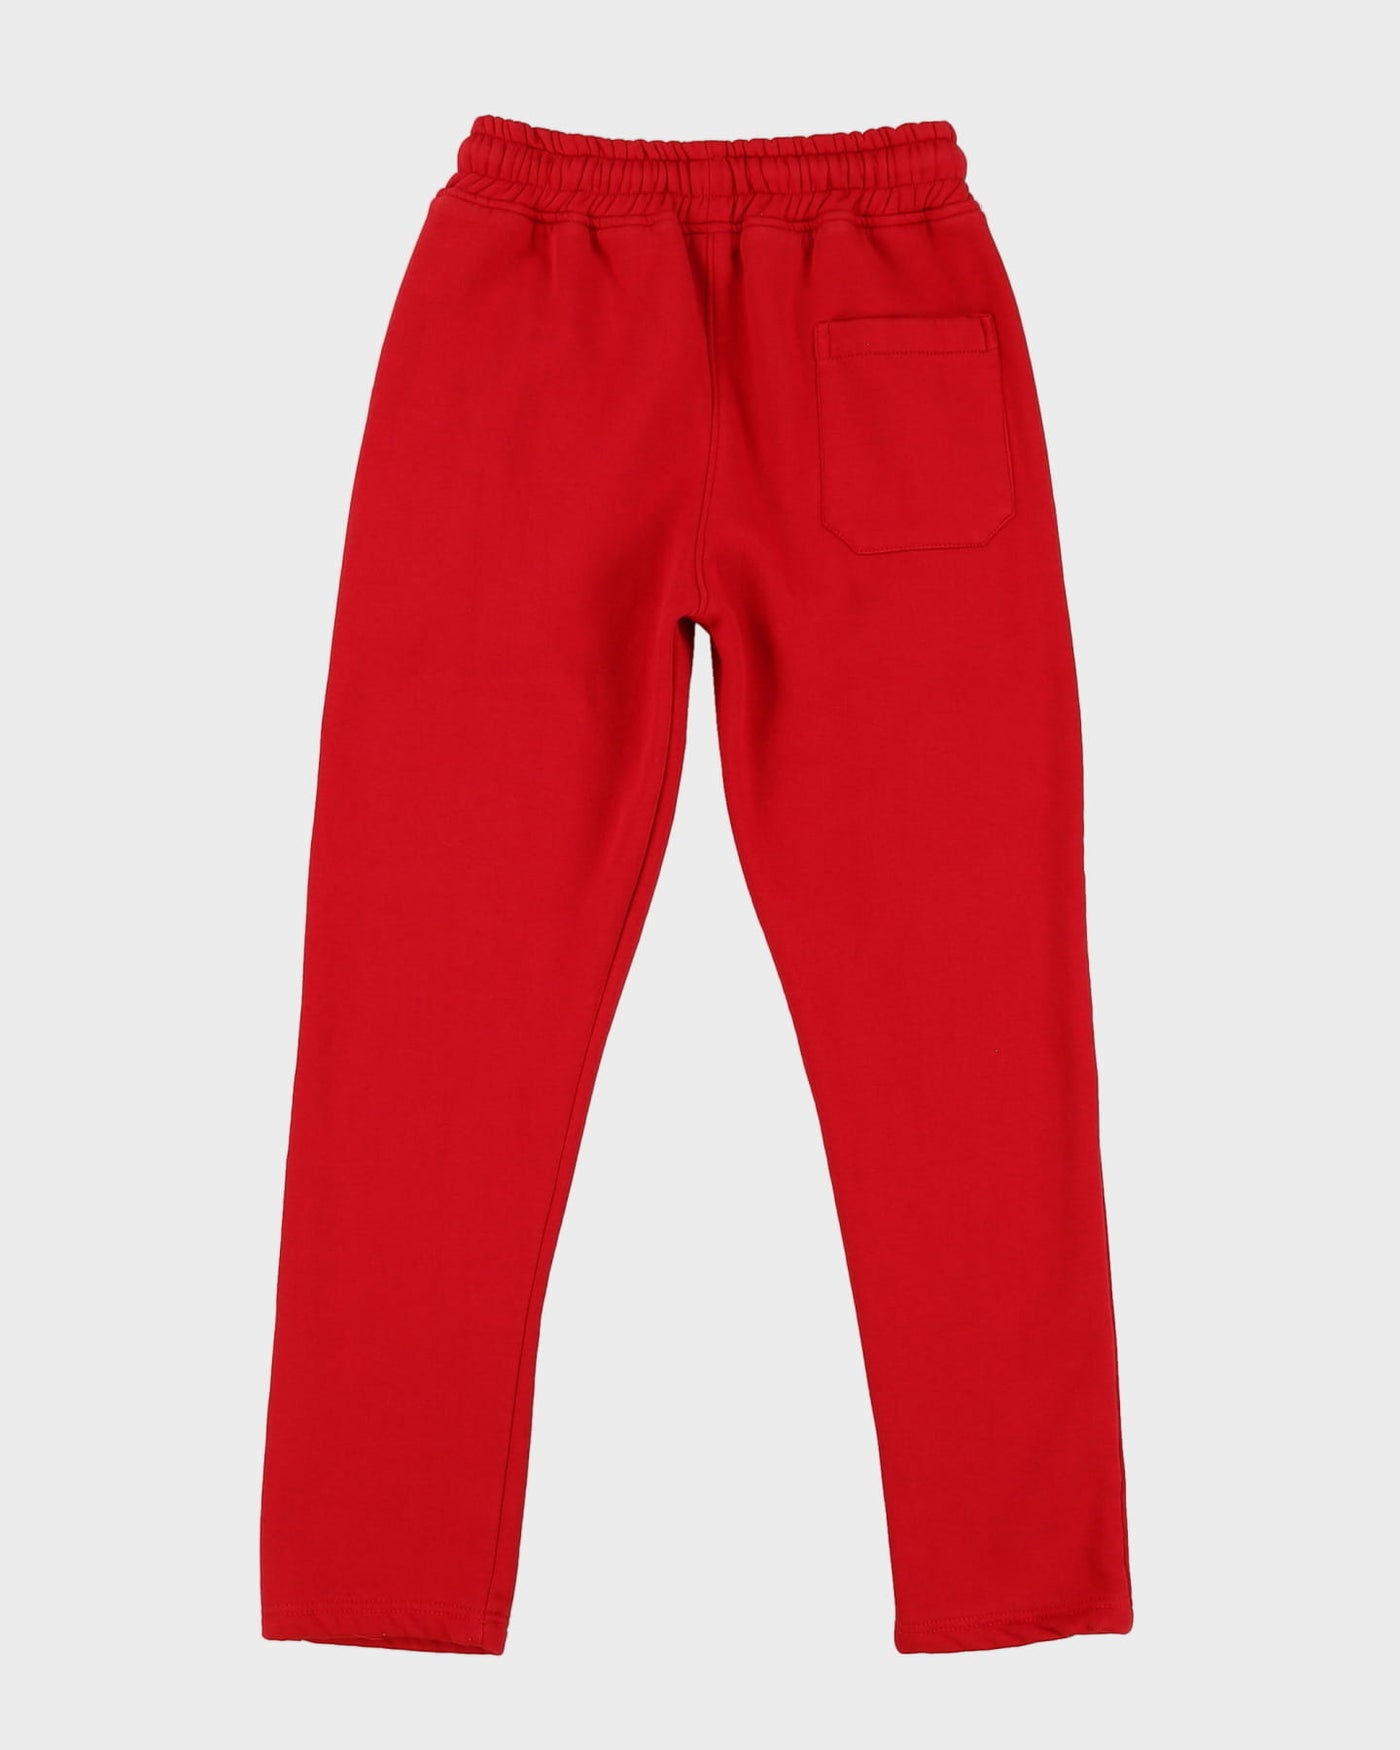 OVO Octobers Very Own Red Tracksuit Bottoms - M